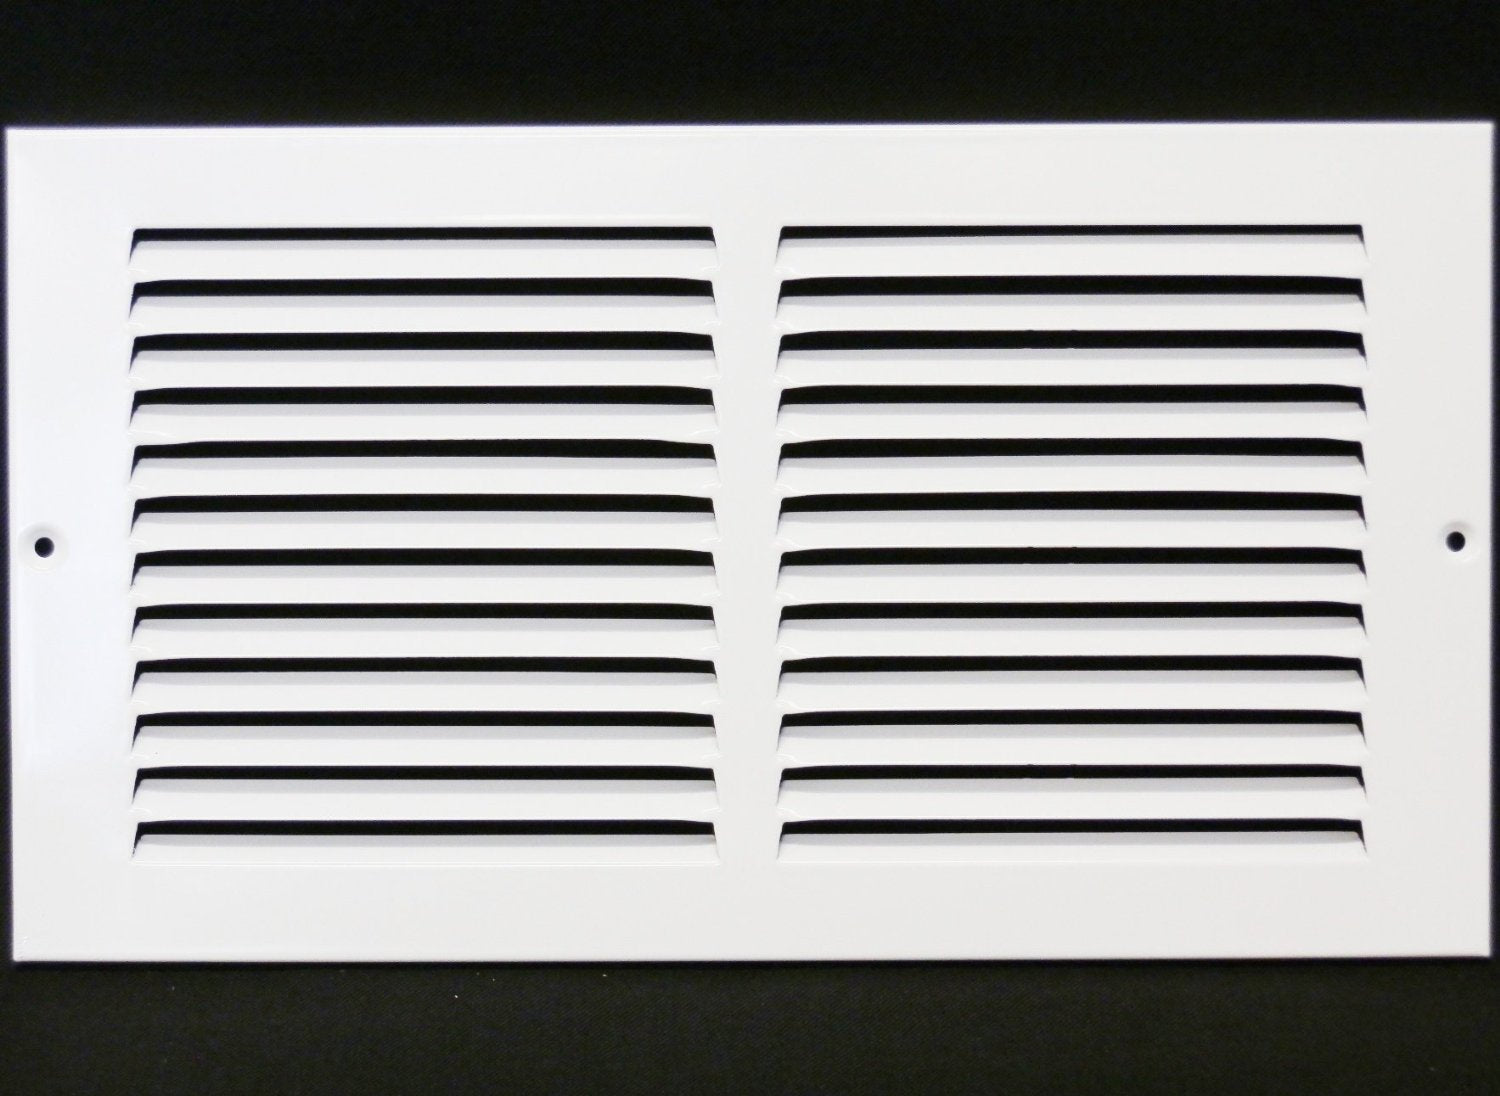 10" X 4" Air Vent Return Grilles - Sidewall and Ceiling - Steel